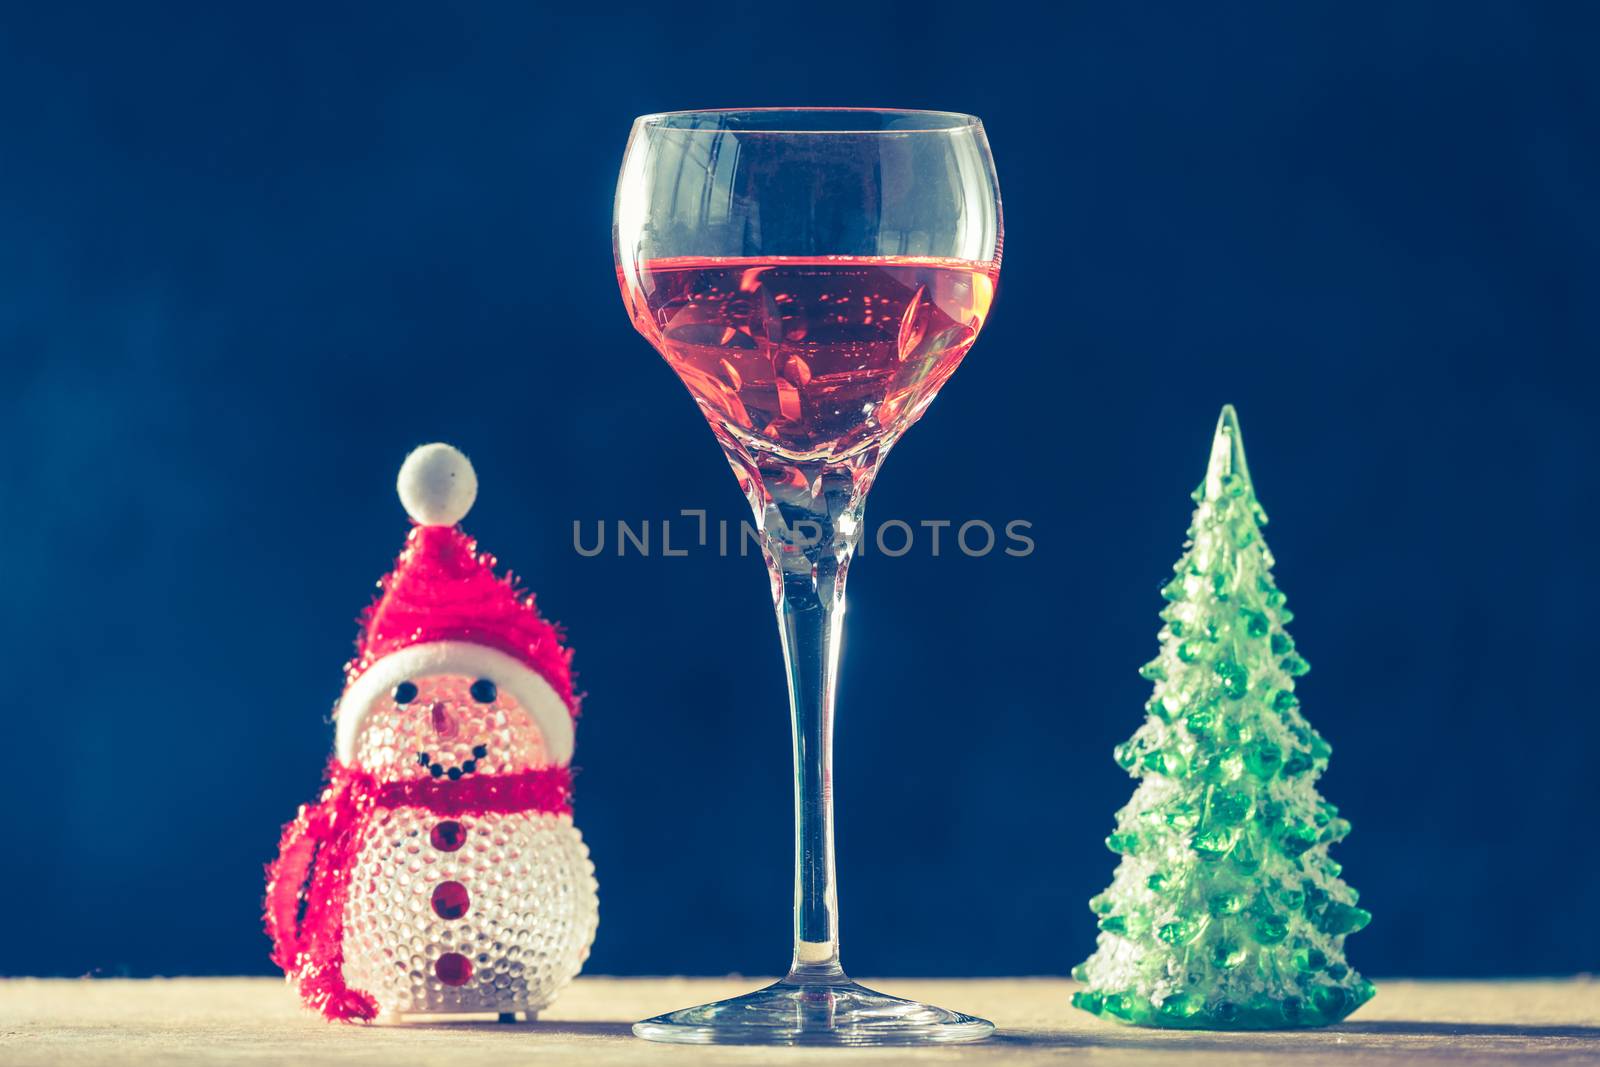 Glass of wine with Christmas decorations on the wooden table, black background,  vintage tone